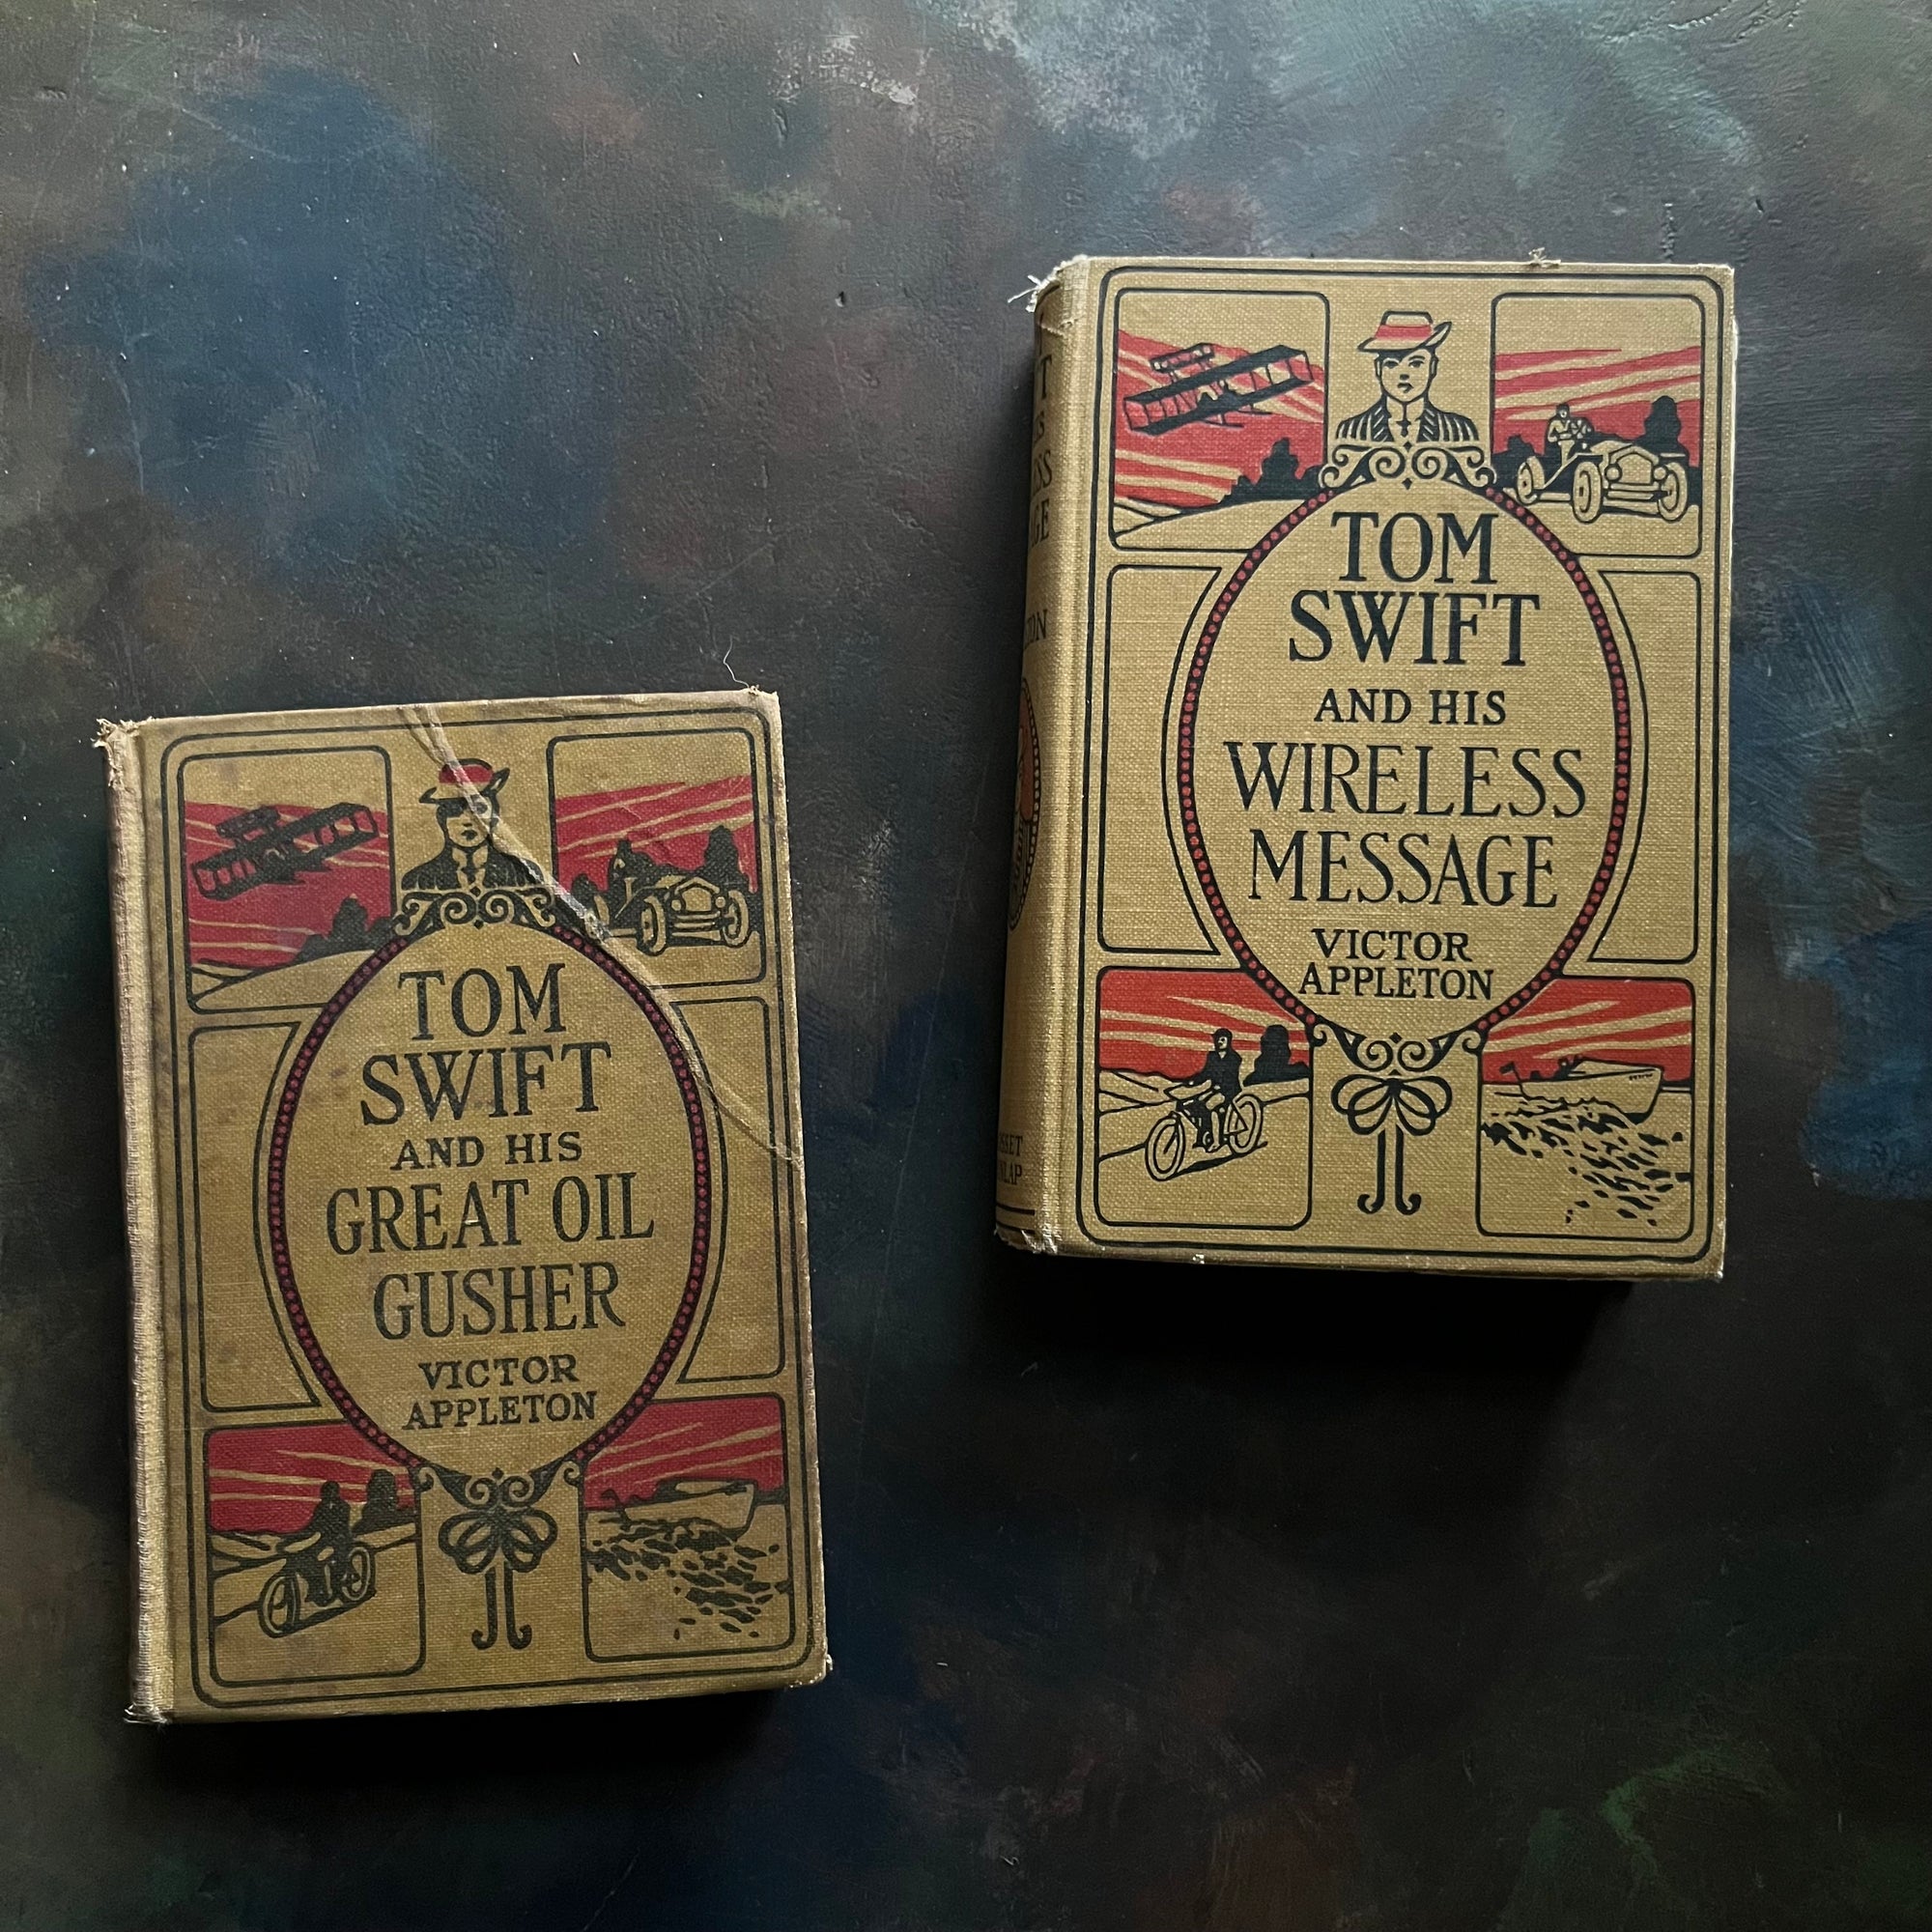 Tom Swift and His Great Oil Gusher and Tom Swift and His Wireless Message written by Victor Appleton-antique science fiction books-view of the front covers